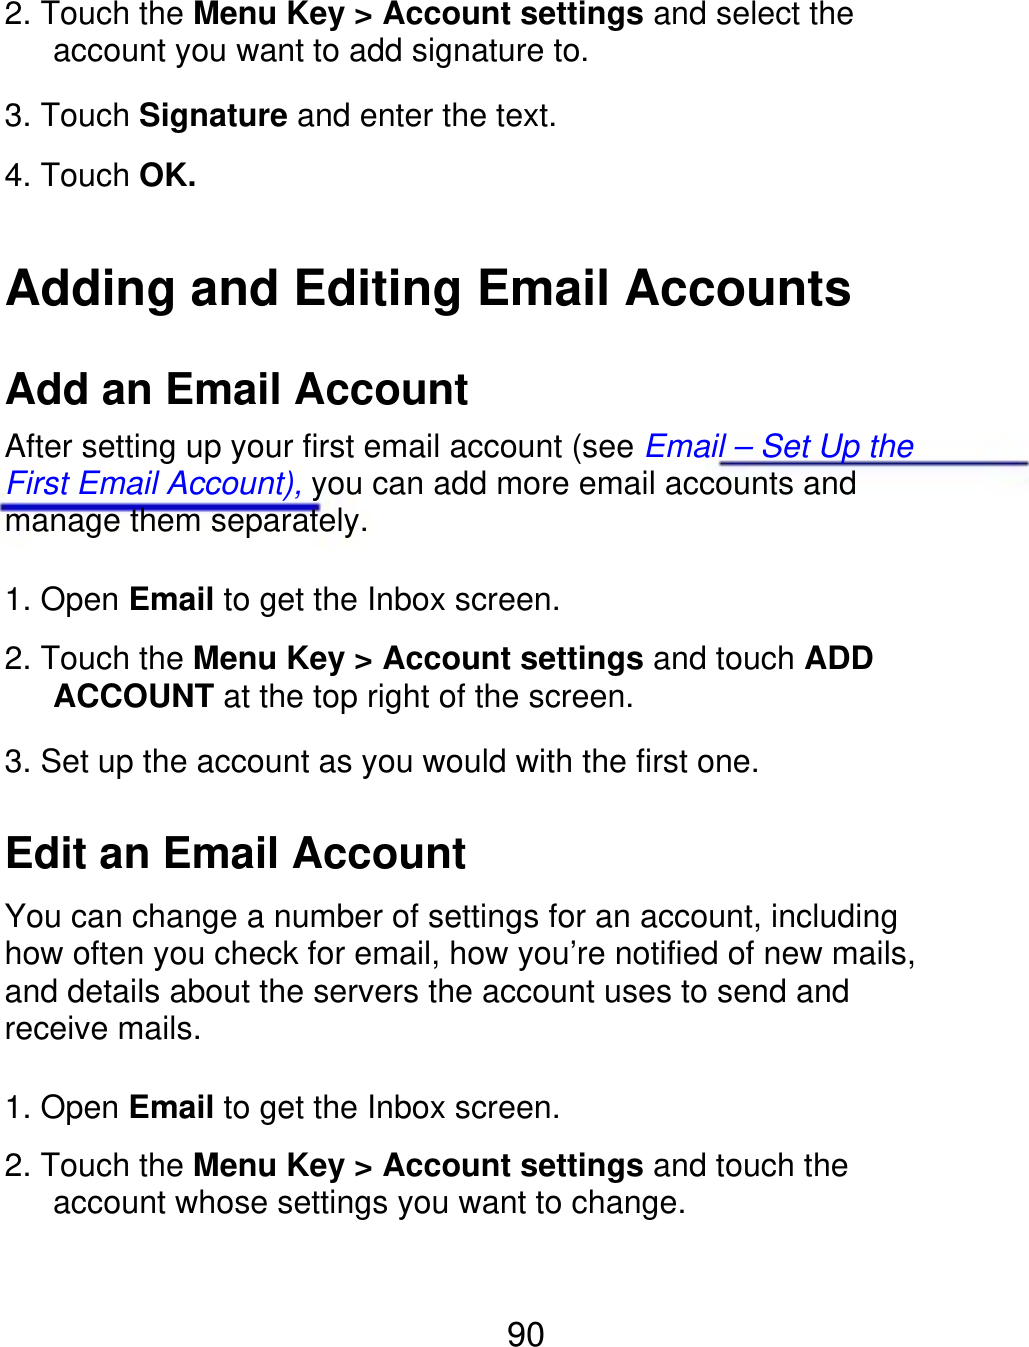 2. Touch the Menu Key &gt; Account settings and select the    account you want to add signature to. 3. Touch Signature and enter the text. 4. Touch OK. Adding and Editing Email Accounts Add an Email Account After setting up your first email account (see Email – Set Up the First Email Account), you can add more email accounts and manage them separately. 1. Open Email to get the Inbox screen. 2. Touch the Menu Key &gt; Account settings and touch ADD    ACCOUNT at the top right of the screen. 3. Set up the account as you would with the first one. Edit an Email Account You can change a number of settings for an account, including how often you check for email, how you’re notified of new mails, and details about the servers the account uses to send and receive mails. 1. Open Email to get the Inbox screen. 2. Touch the Menu Key &gt; Account settings and touch the       account whose settings you want to change. 90 